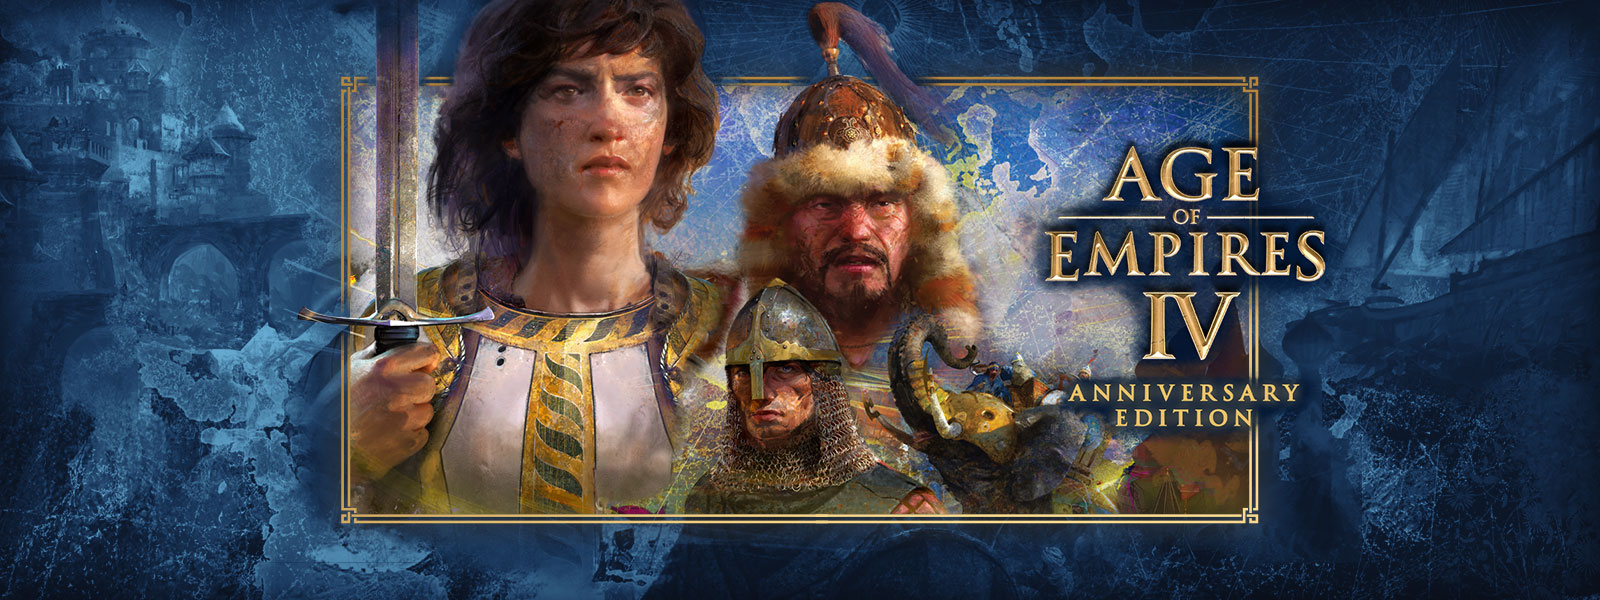 Age of Empires IV: Anniversary Edition. Three characters with scenes of war and armoured elephants around them.